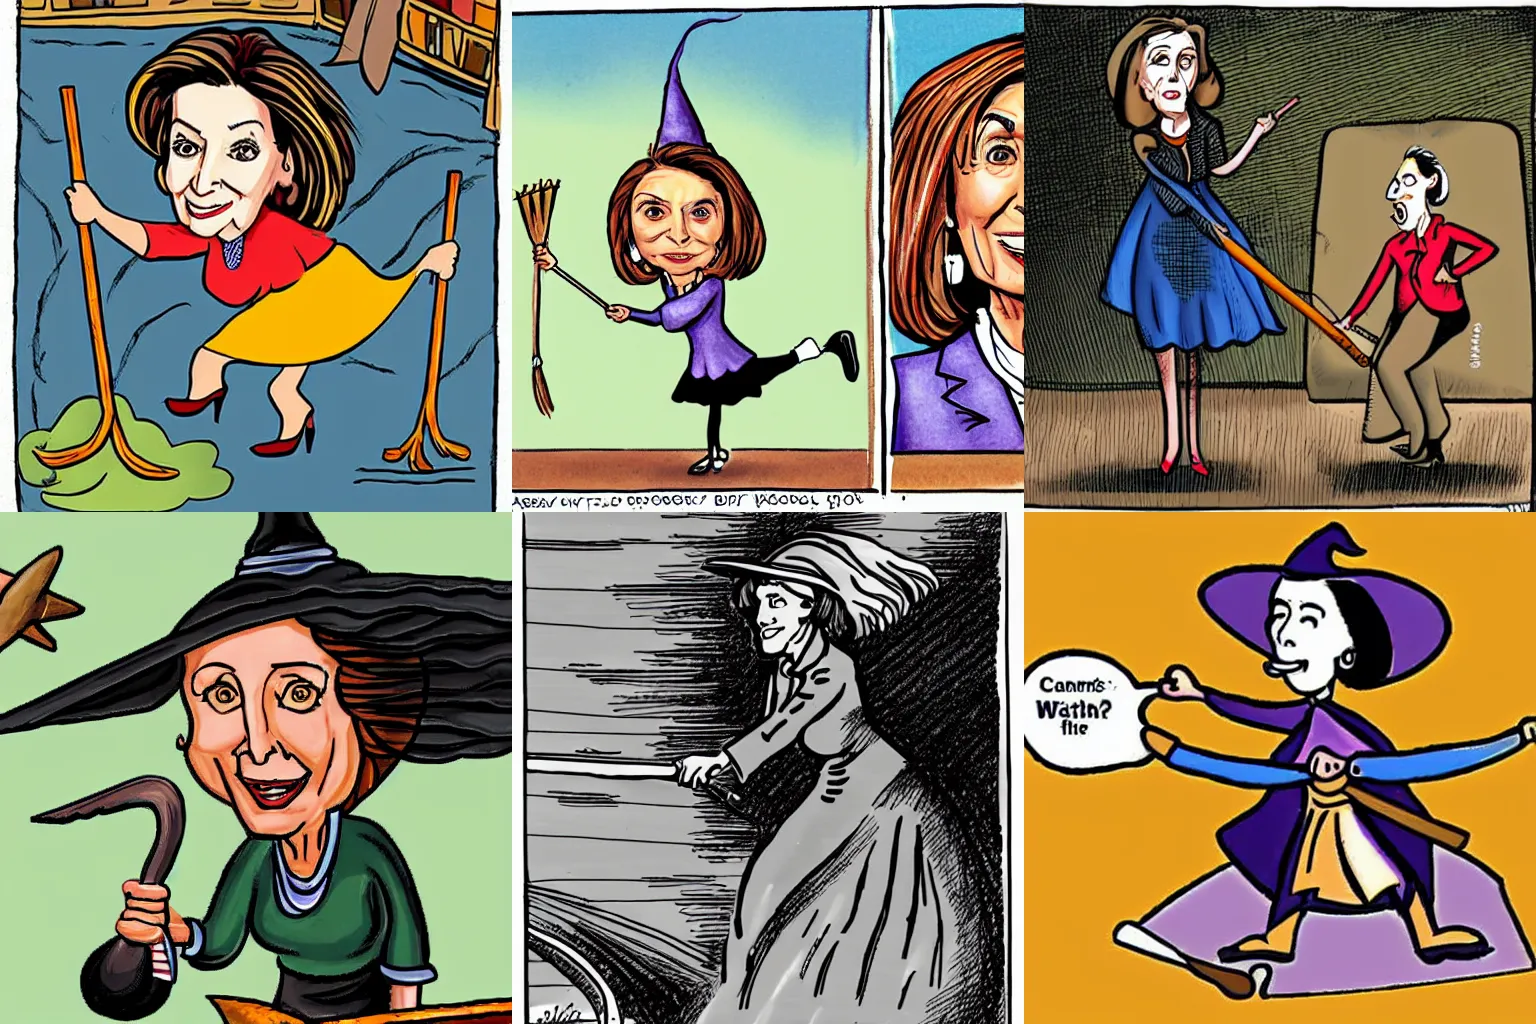 Prompt: a cartoonist image of Nancy pelosi riding a broomstick like a witch